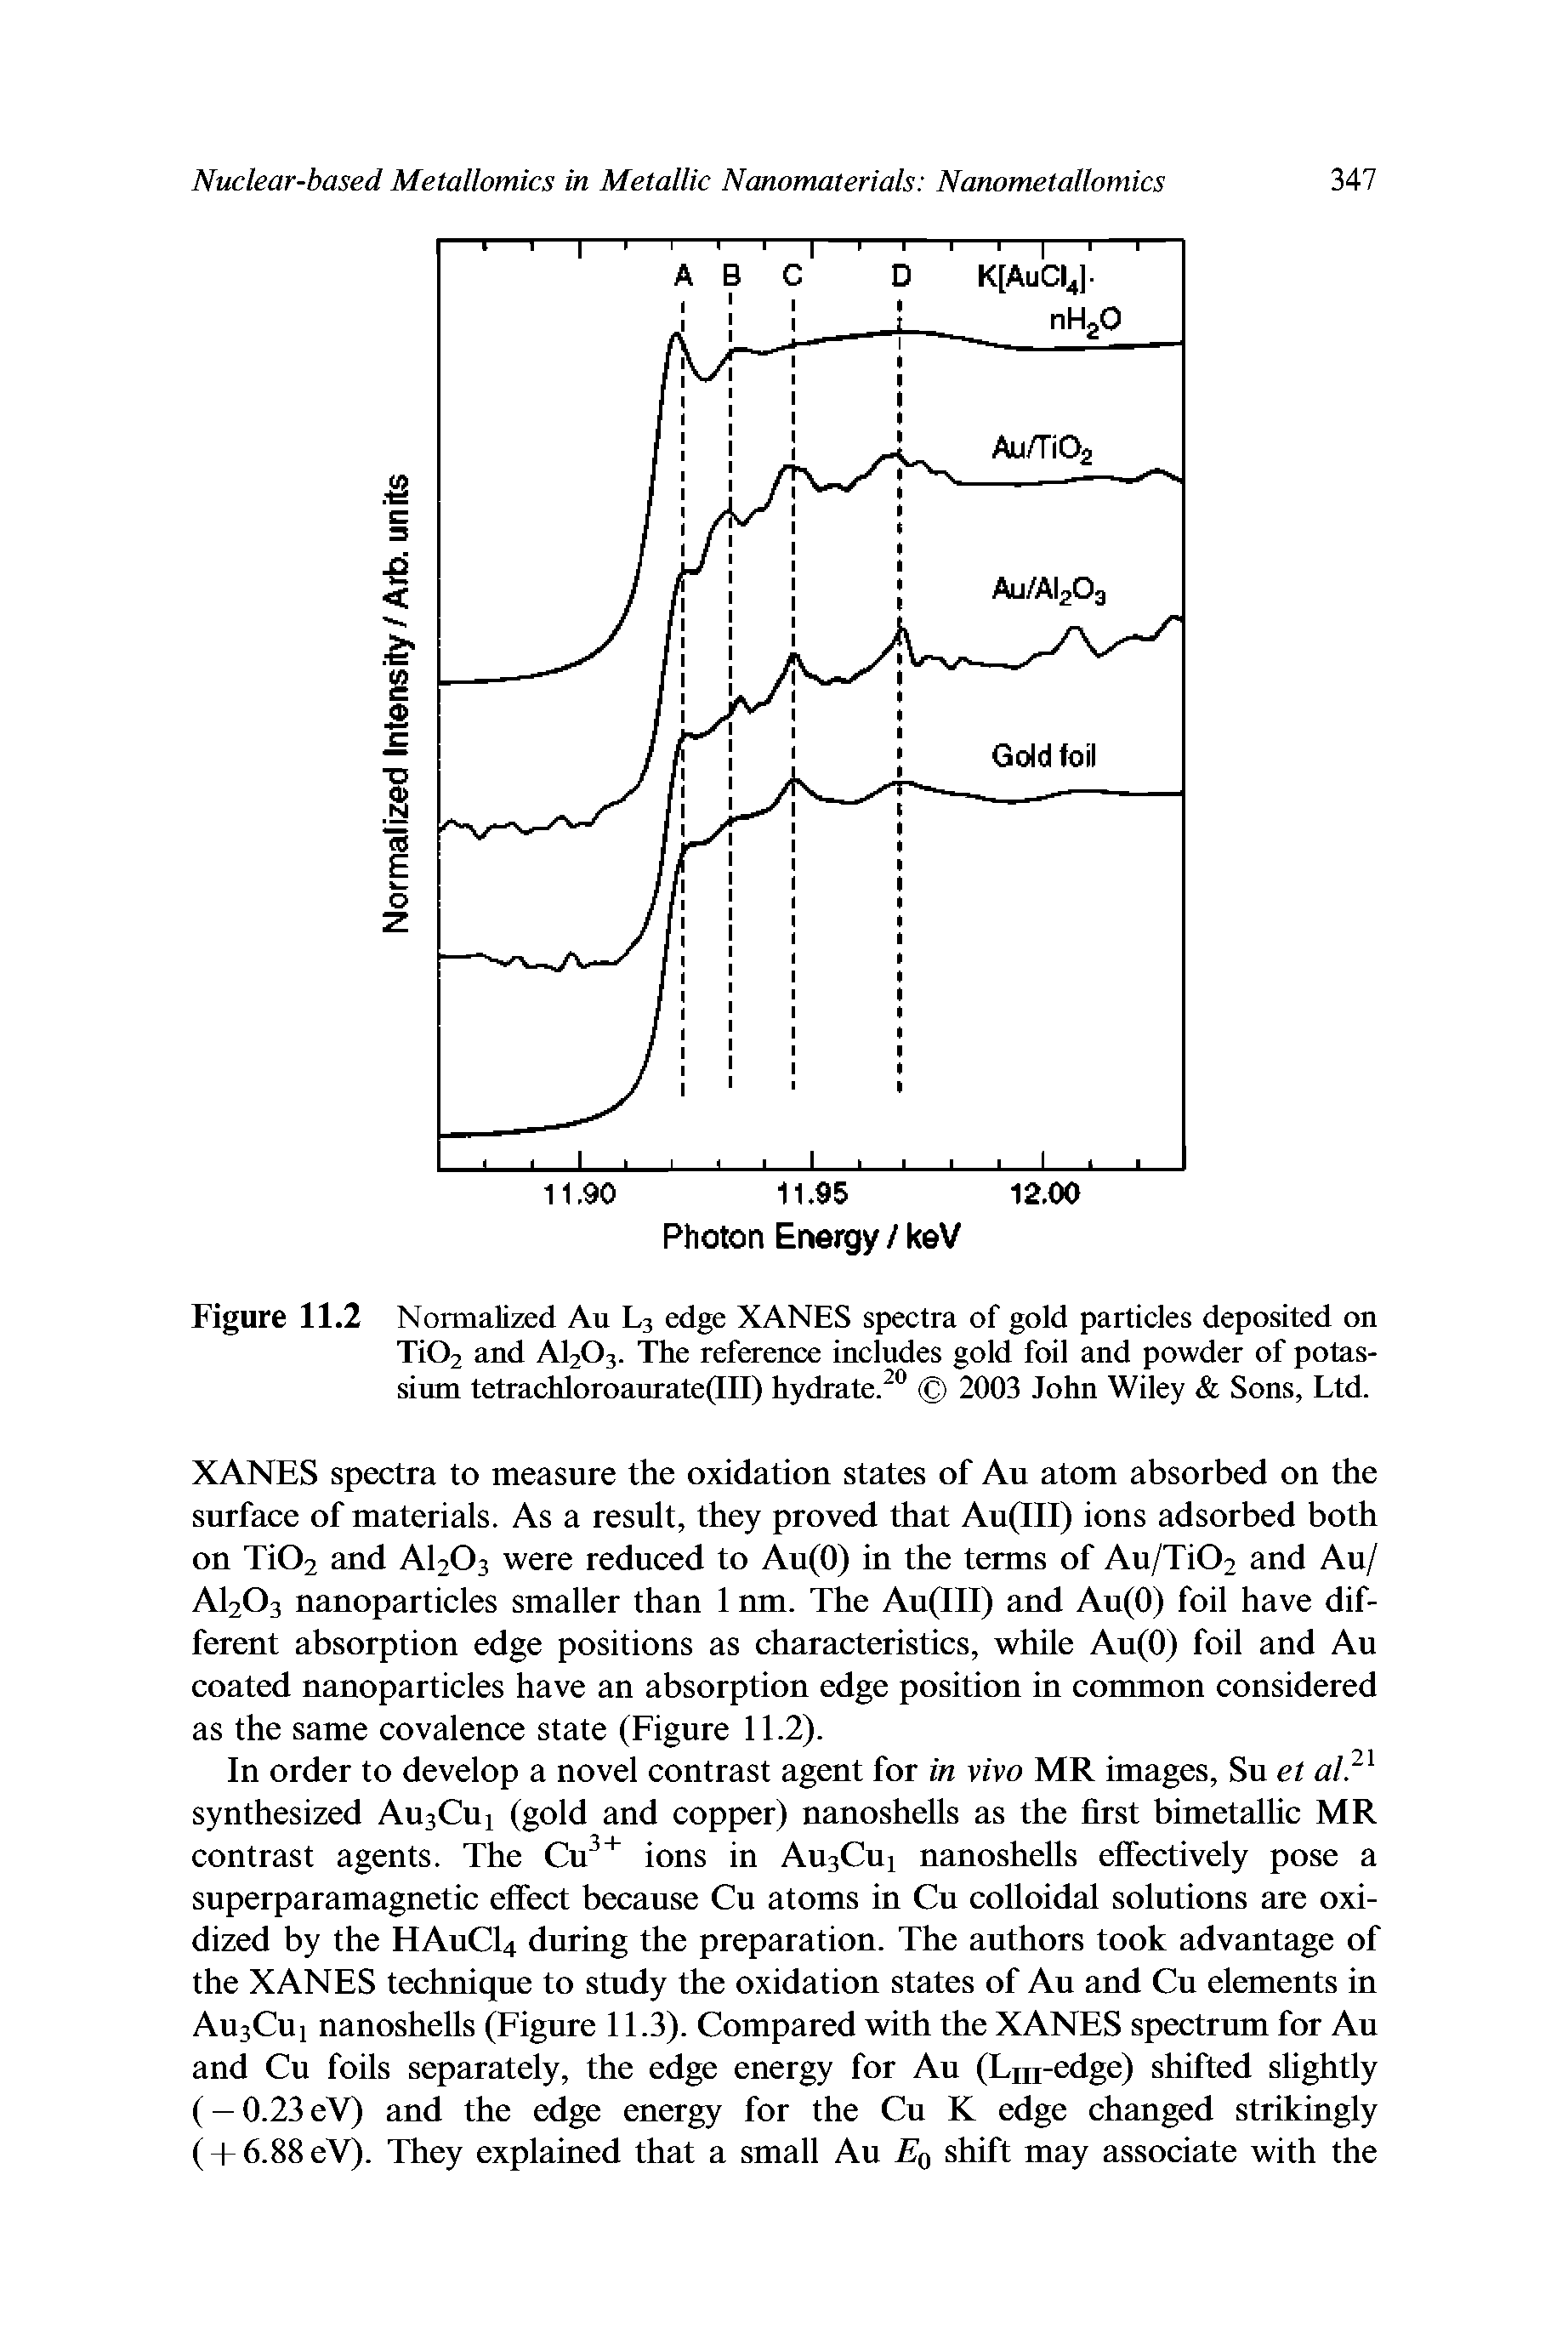 Figure 11.2 Normalized Au L3 edge XANES spectra of gold particles deposited on Ti02 and AI2O3. The reference includes gold foil and powder of potassium tetrachloroaurate(III) hydrate. 2003 John Wiley Sons, Ltd.